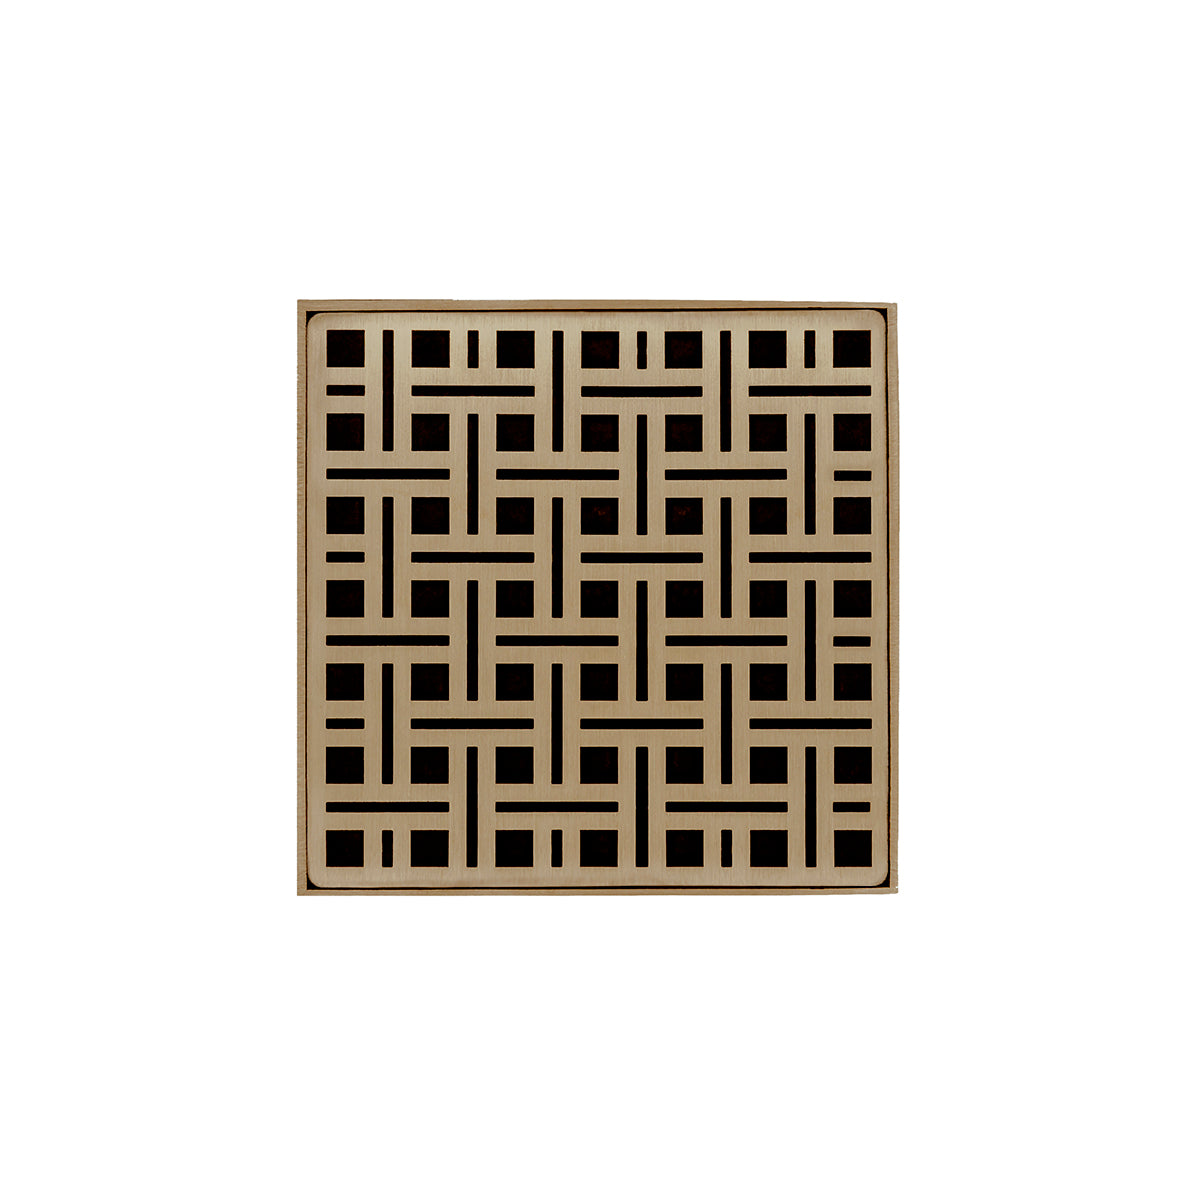 Infinity Drain 5" x 5" VD 5 Premium Center Drain Kit with Weave Pattern Decorative Plate with PVC Drain Body, 2" Outlet